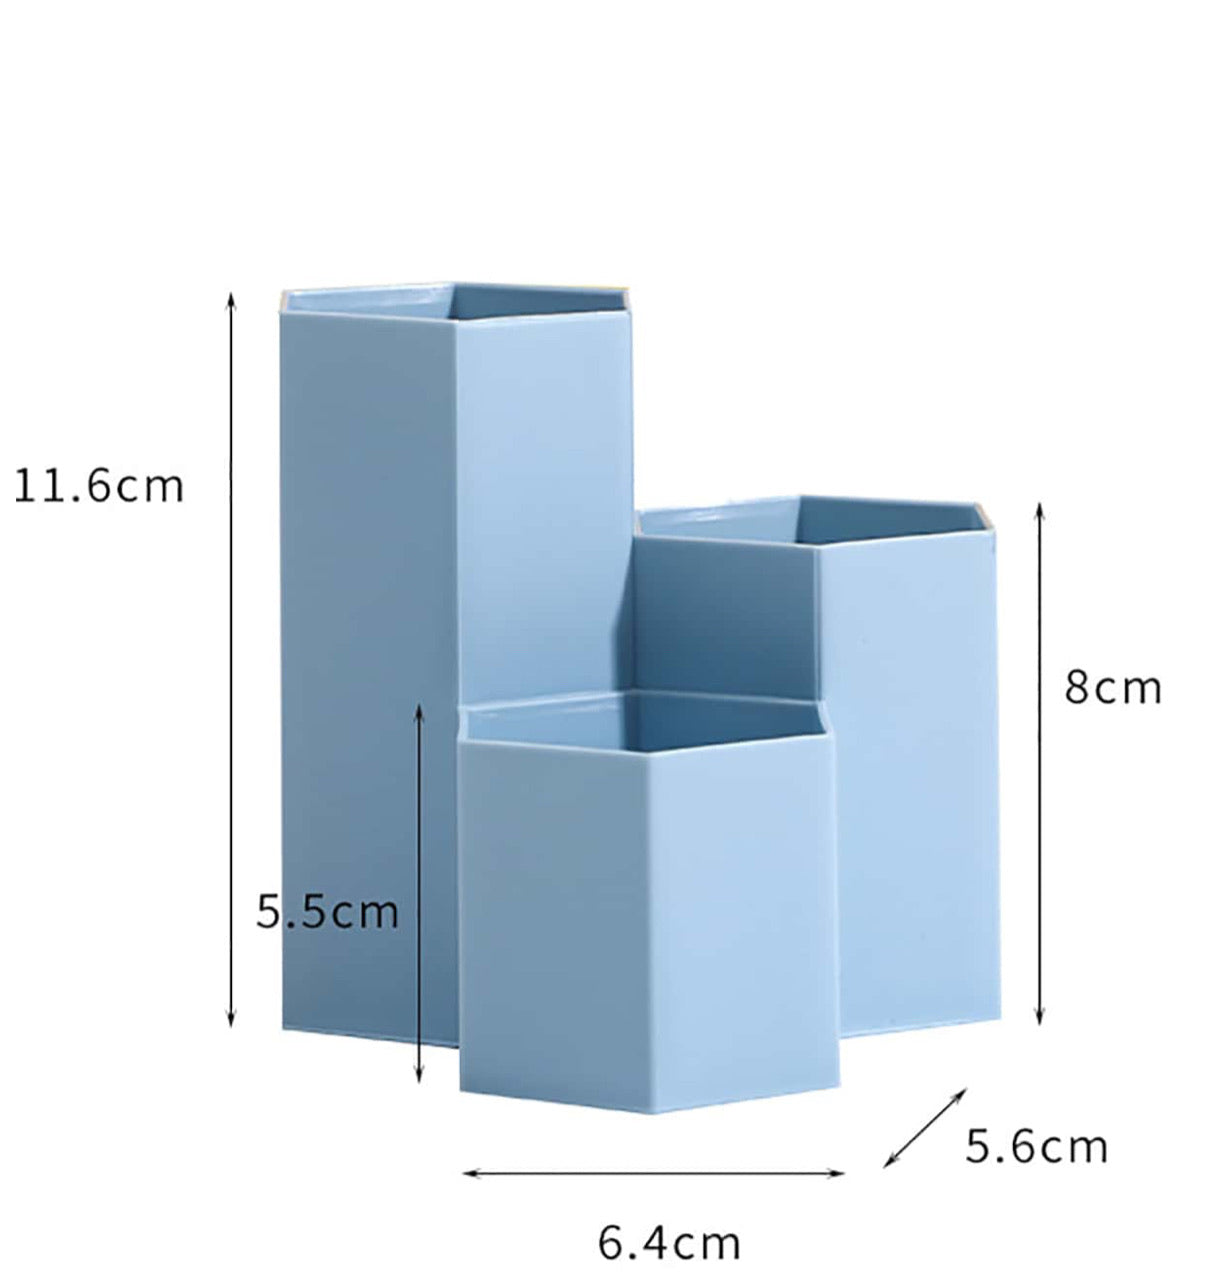 shows the dimensions of Coral and Ink's blue hexagon pen pot